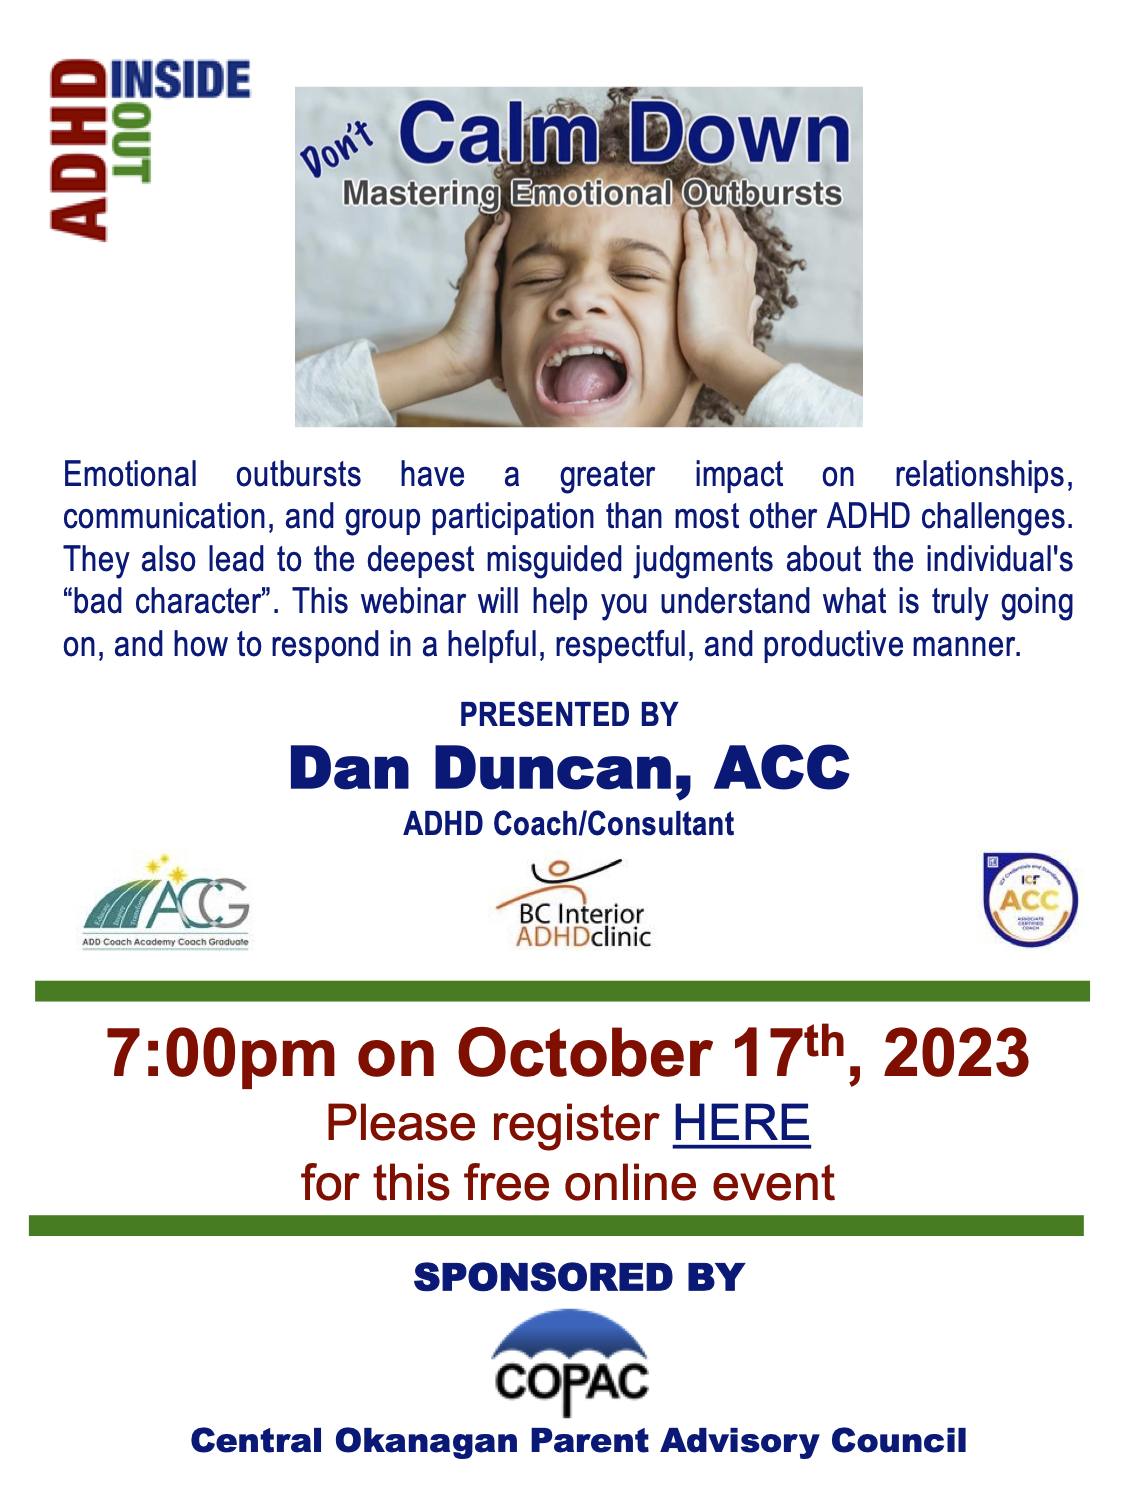 ADHD Inside Out - Don't Calm Down with Dan Duncan!